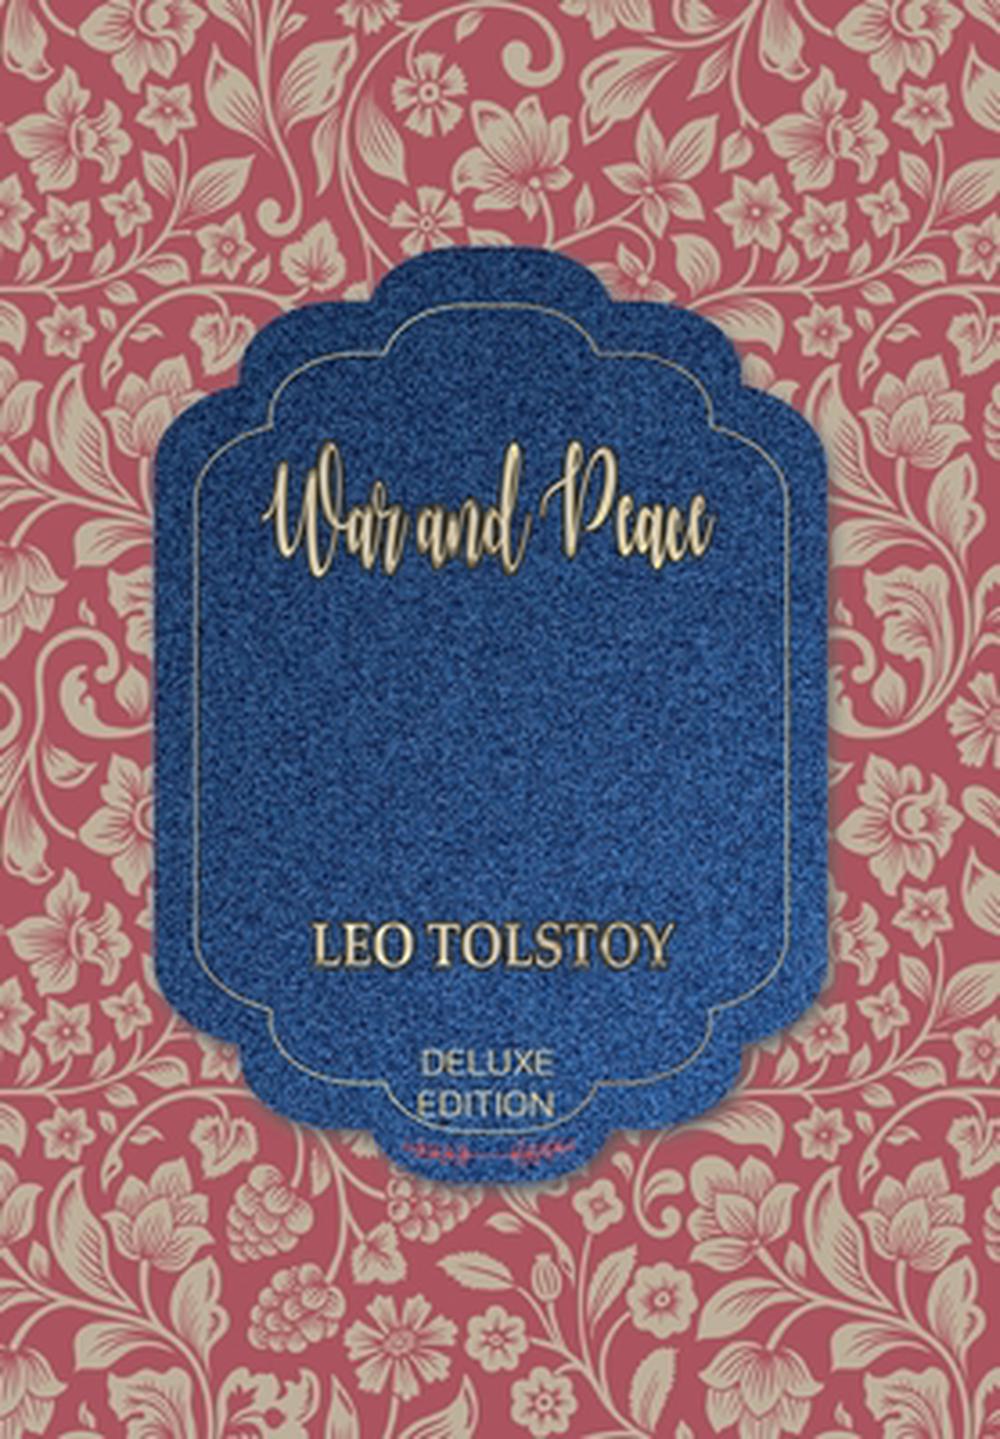 war and peace leo tolstoy book